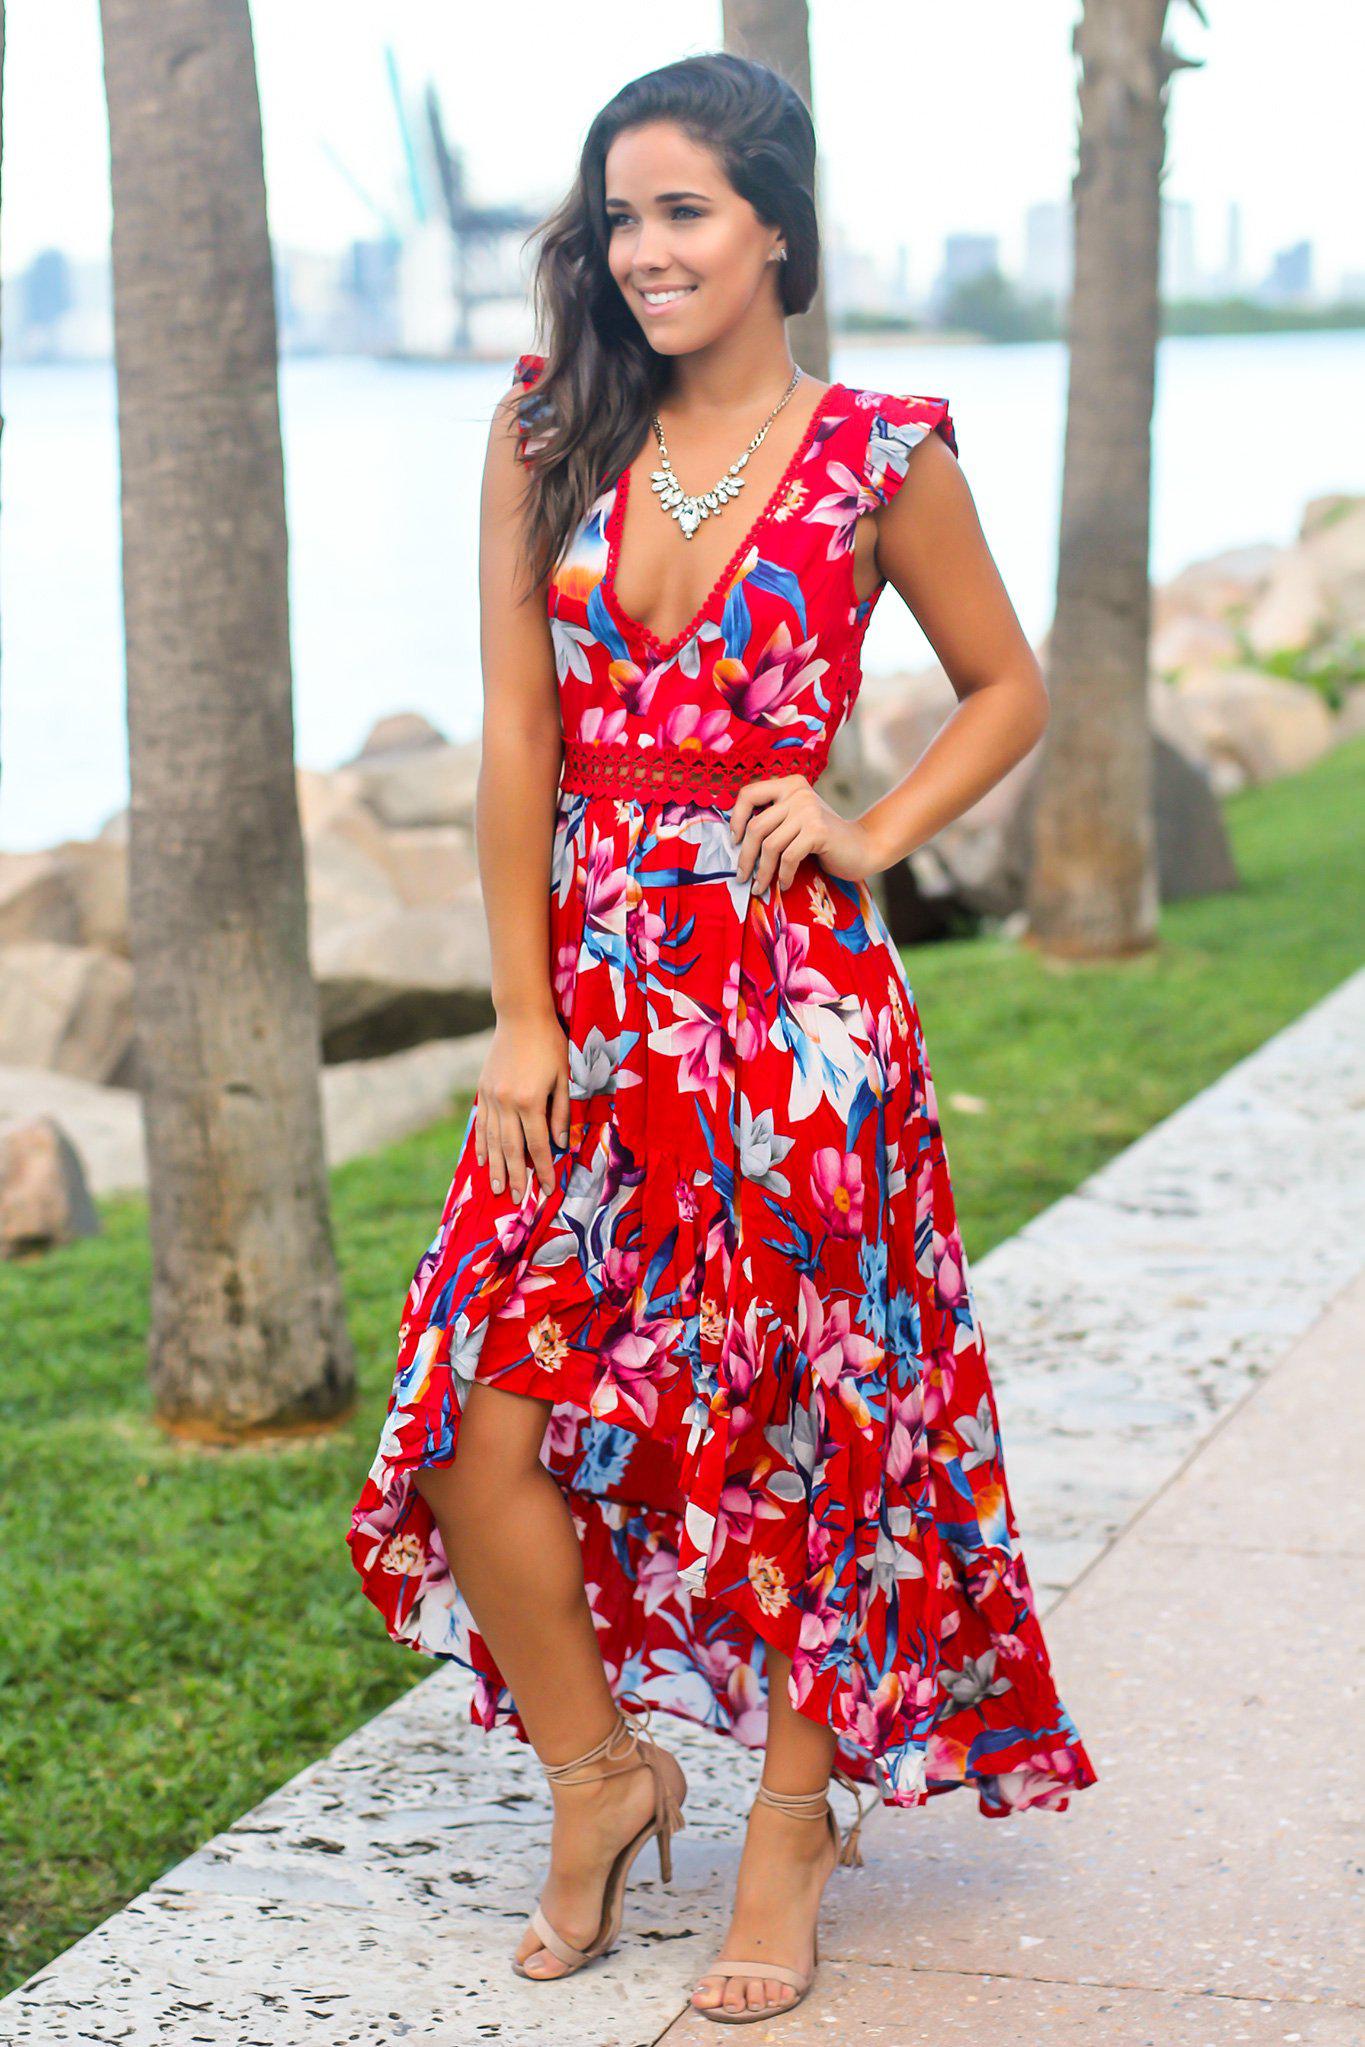 Red and Fuchsia Floral High Low Dress with Crochet Open Back Detail